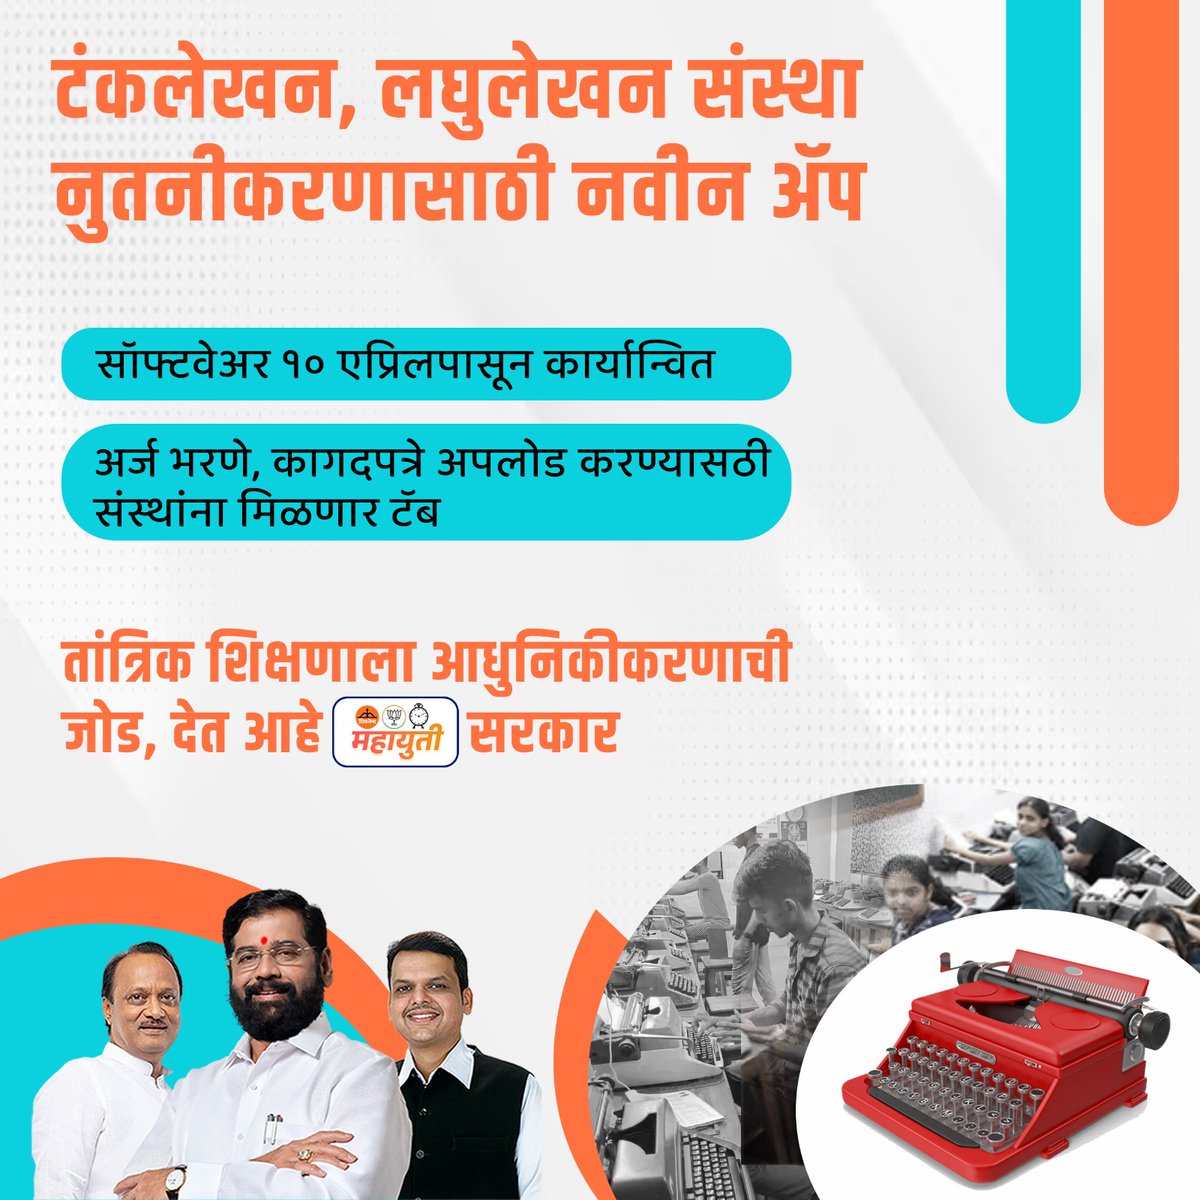 From application to document upload, the new typing software streamlines the process for organizations, fostering convenience and efficiency. Big shoutout to CM Eknath Shinde Govt for their proactive efforts in promoting skill development and digital empowerment!